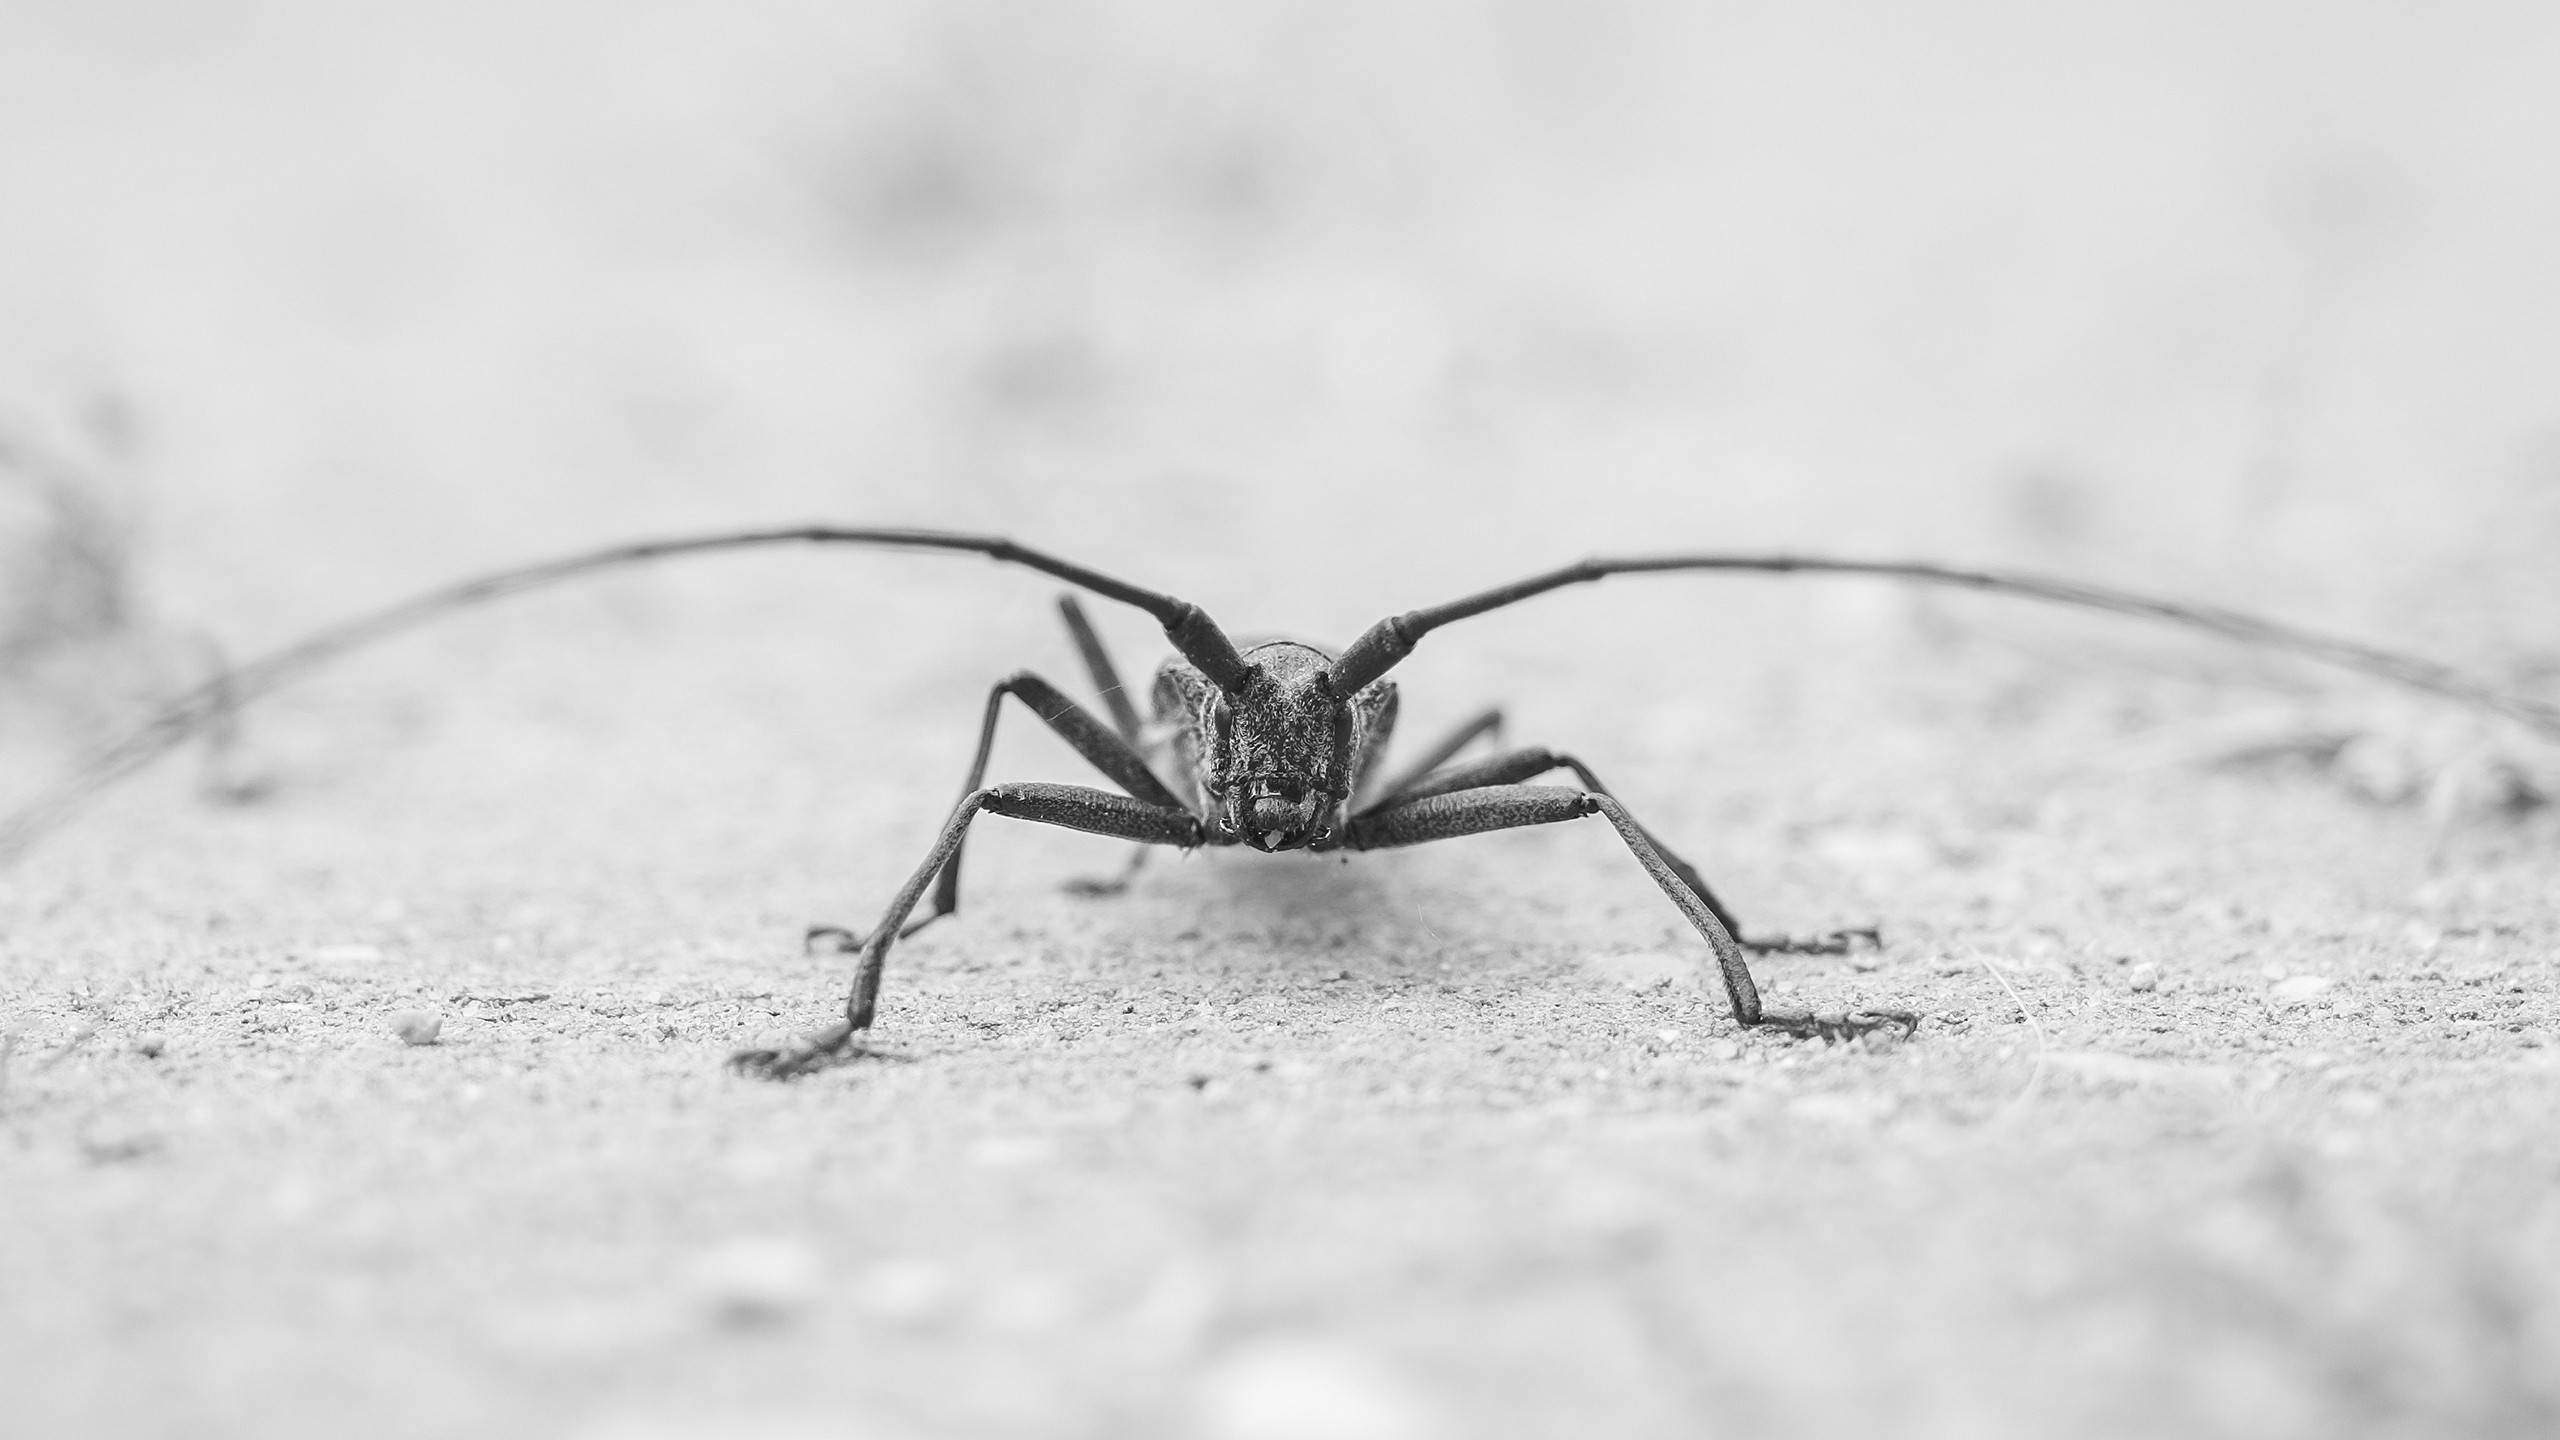 General 2560x1440 insect macro monochrome animals